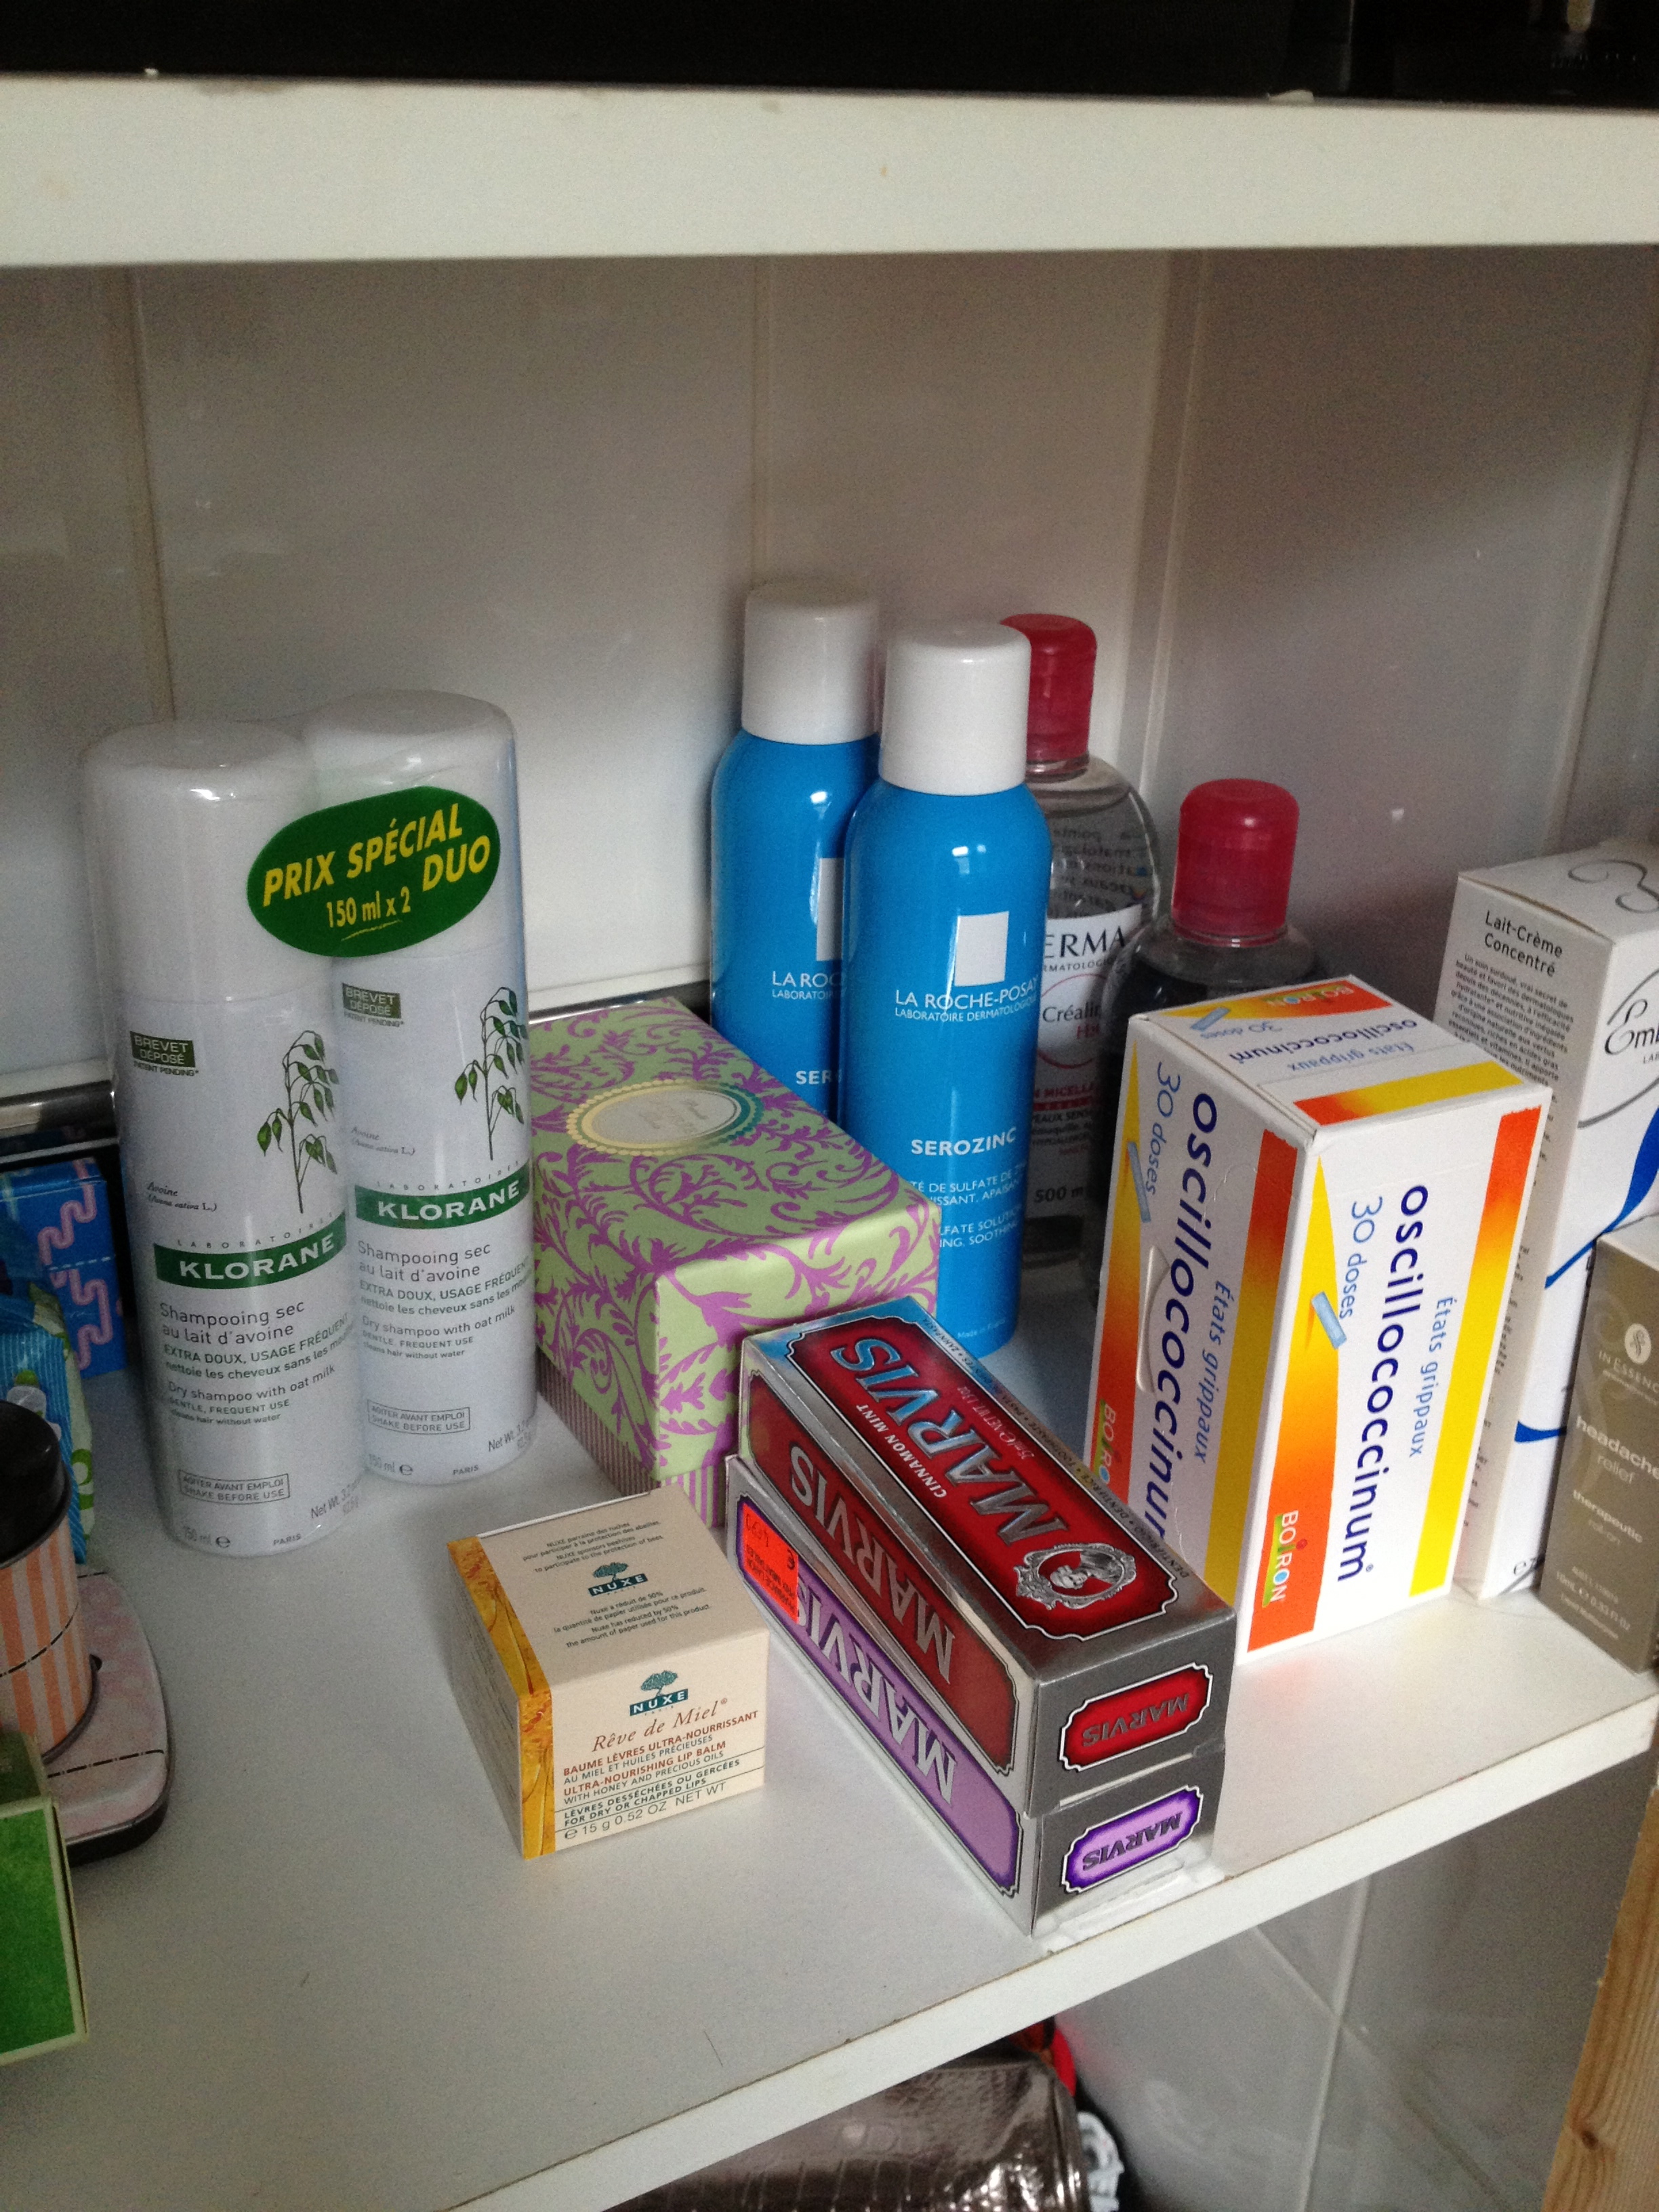  My bathroom cabinet now looks like the shelves of a French pharmacy 